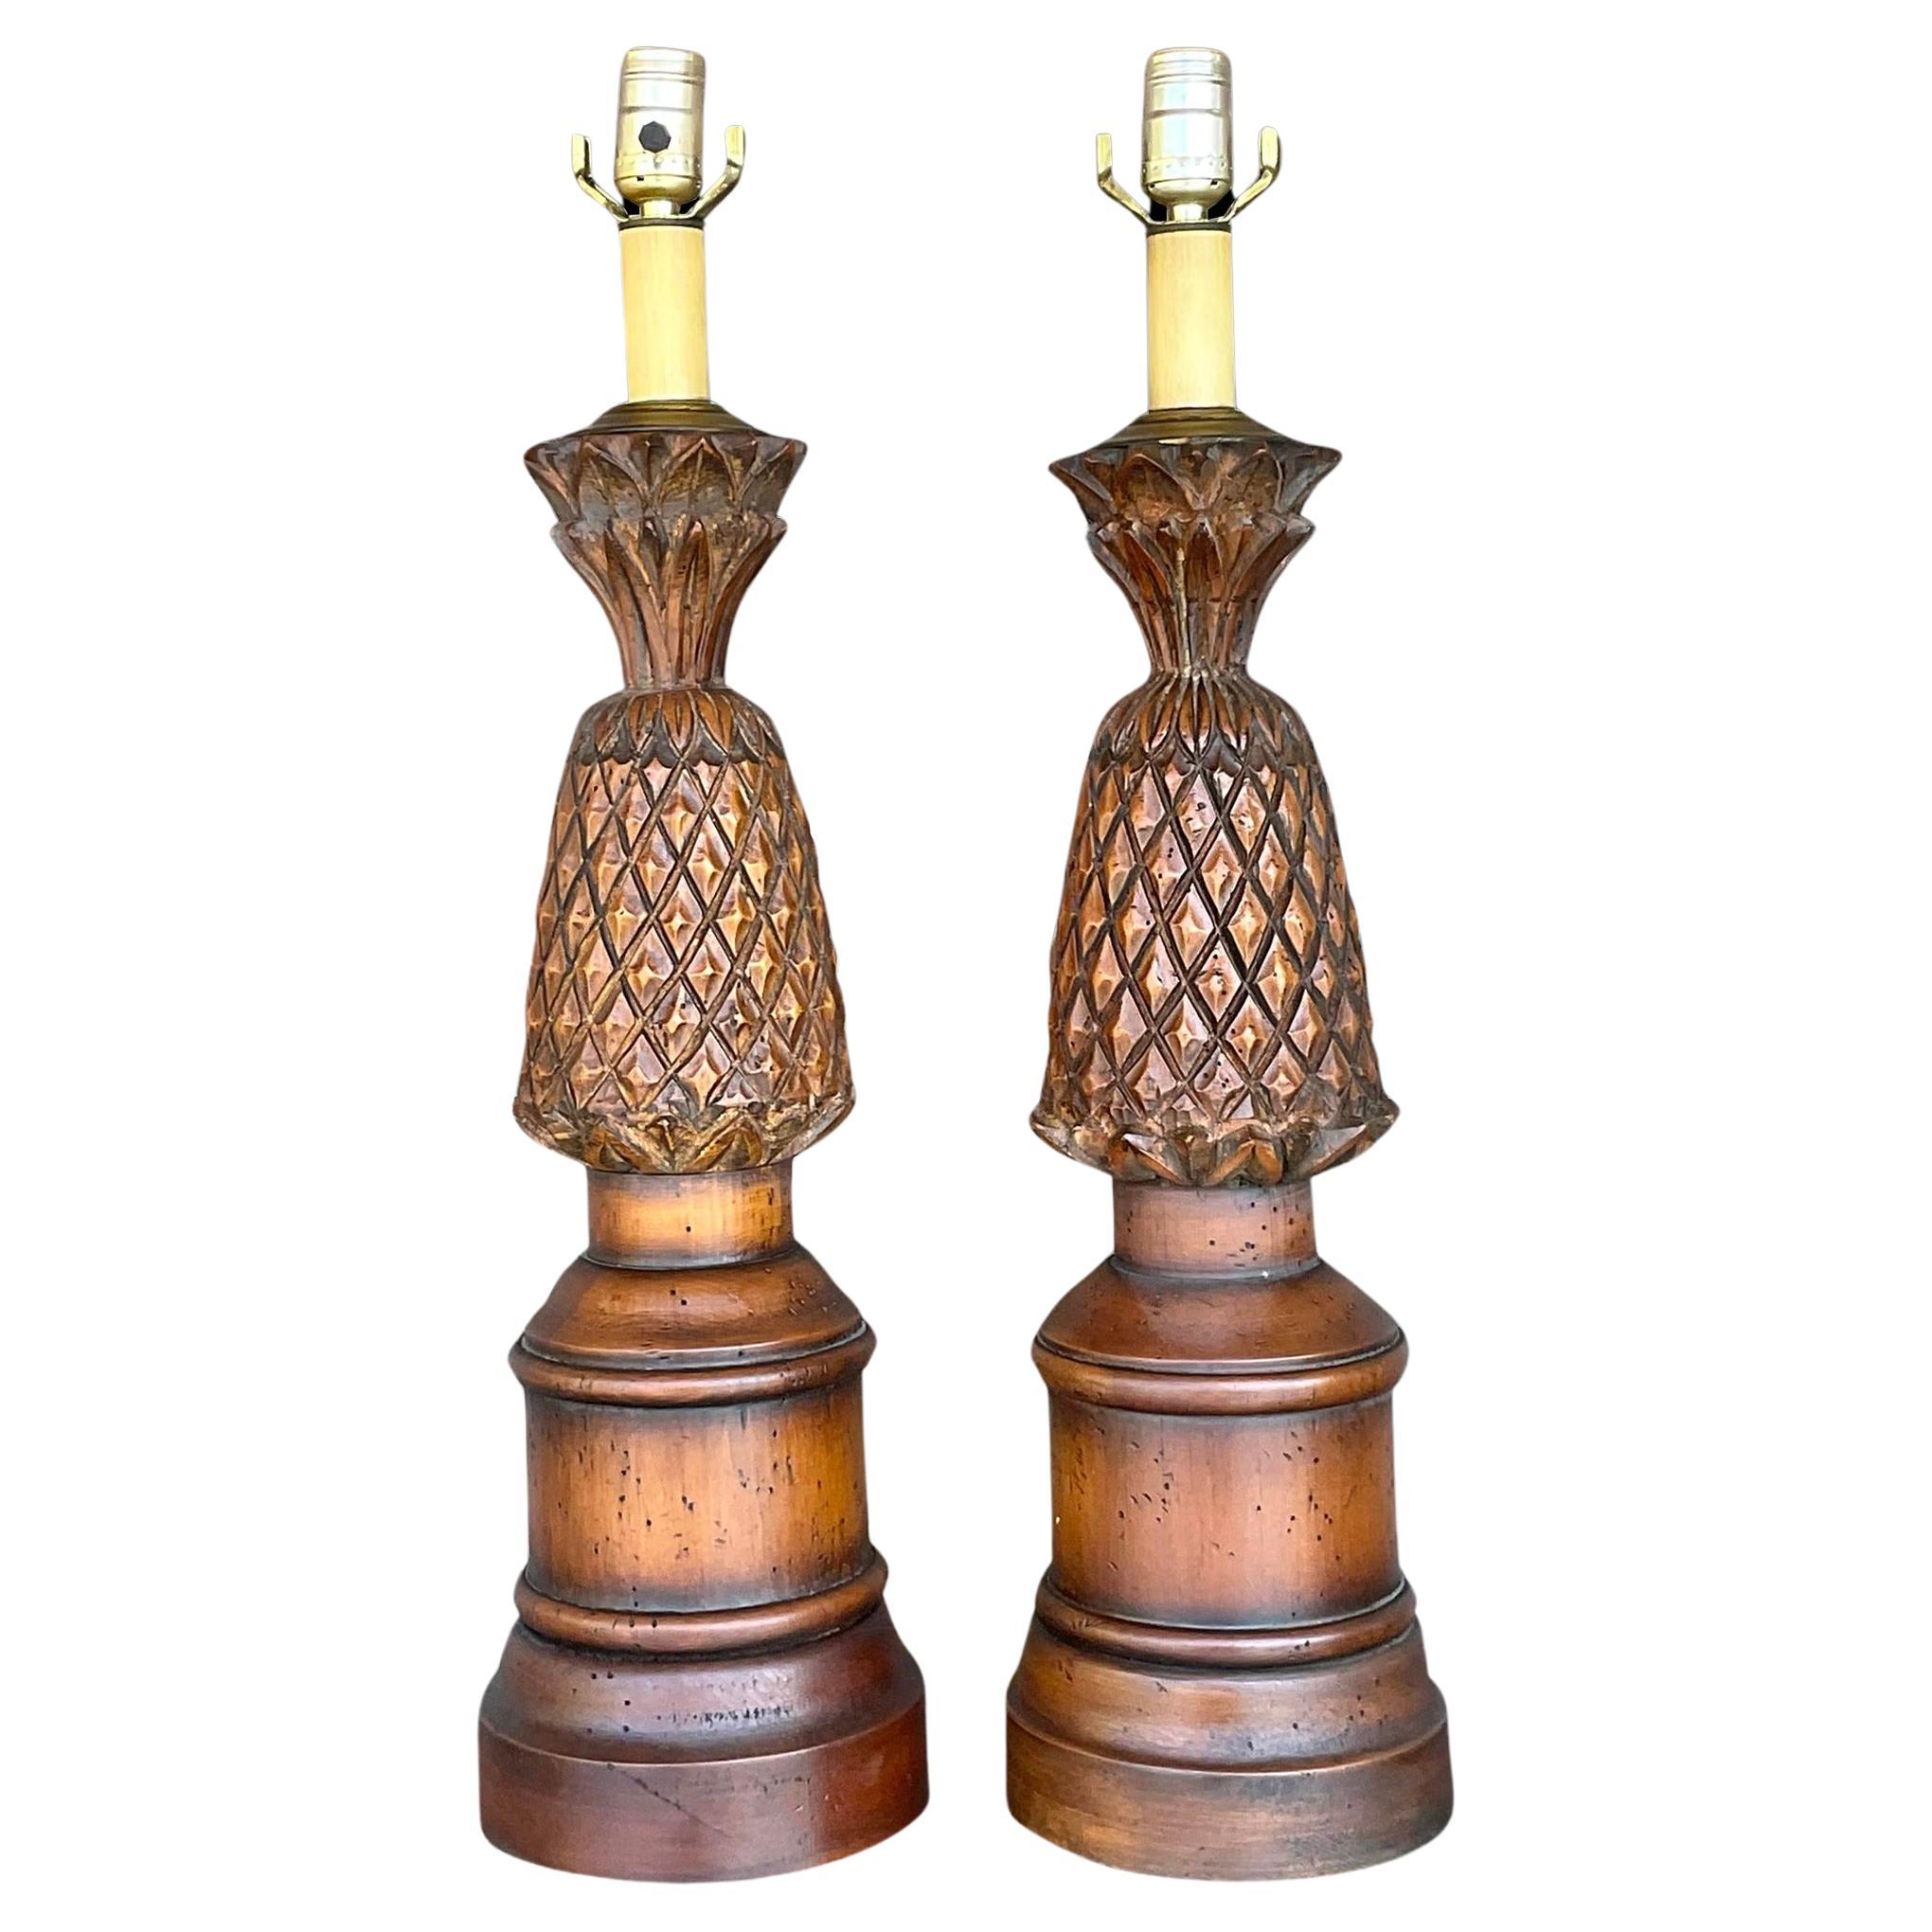 Vintage Boho Hand Carved Pineapple Lamps - a Pair For Sale